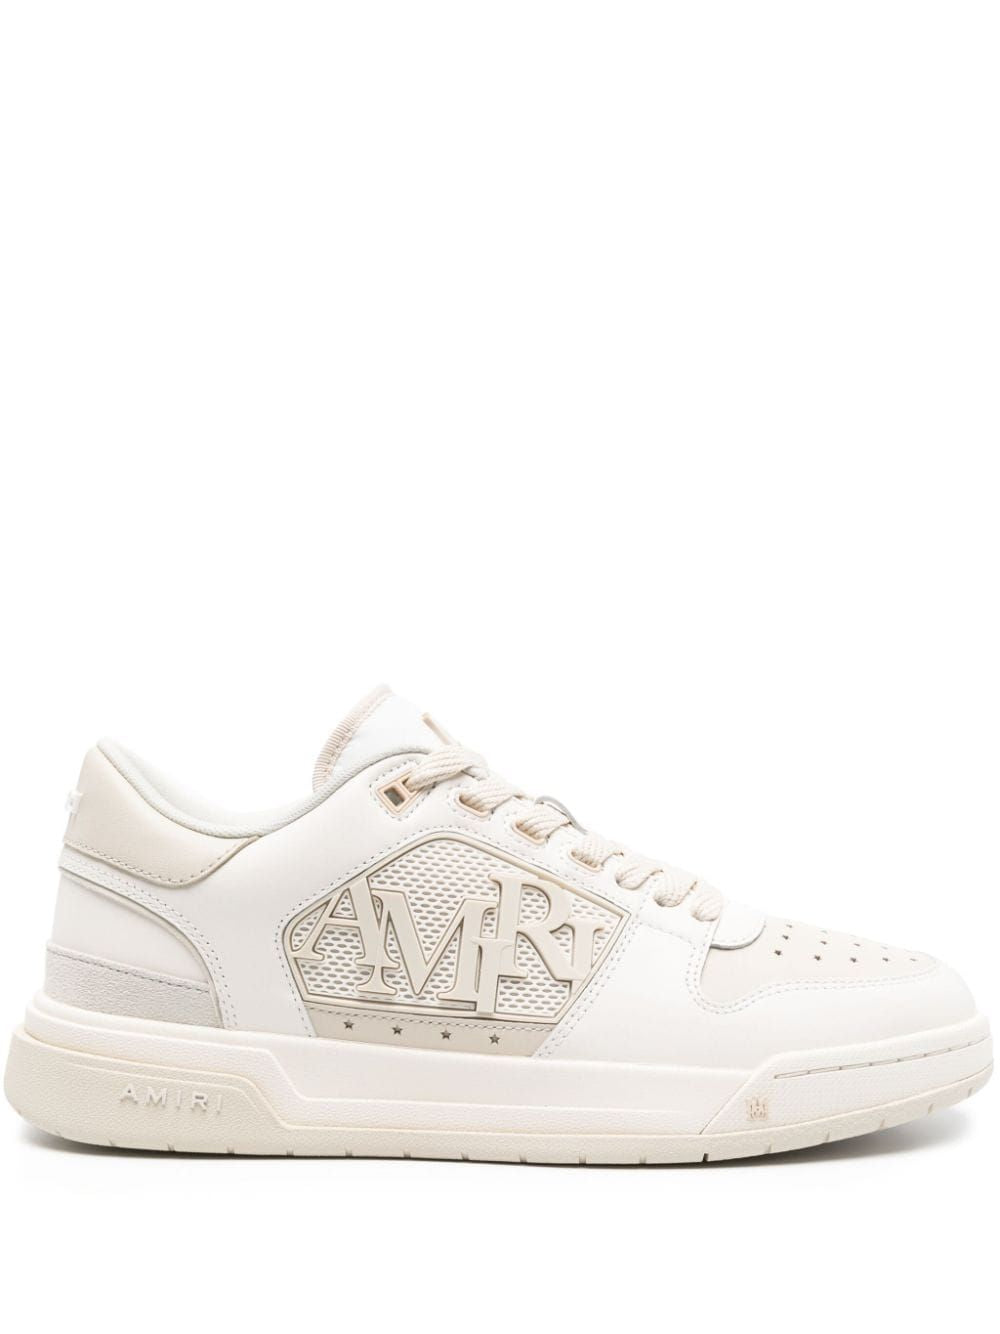 AMIRI Classic Low White Leather Sneakers for Men